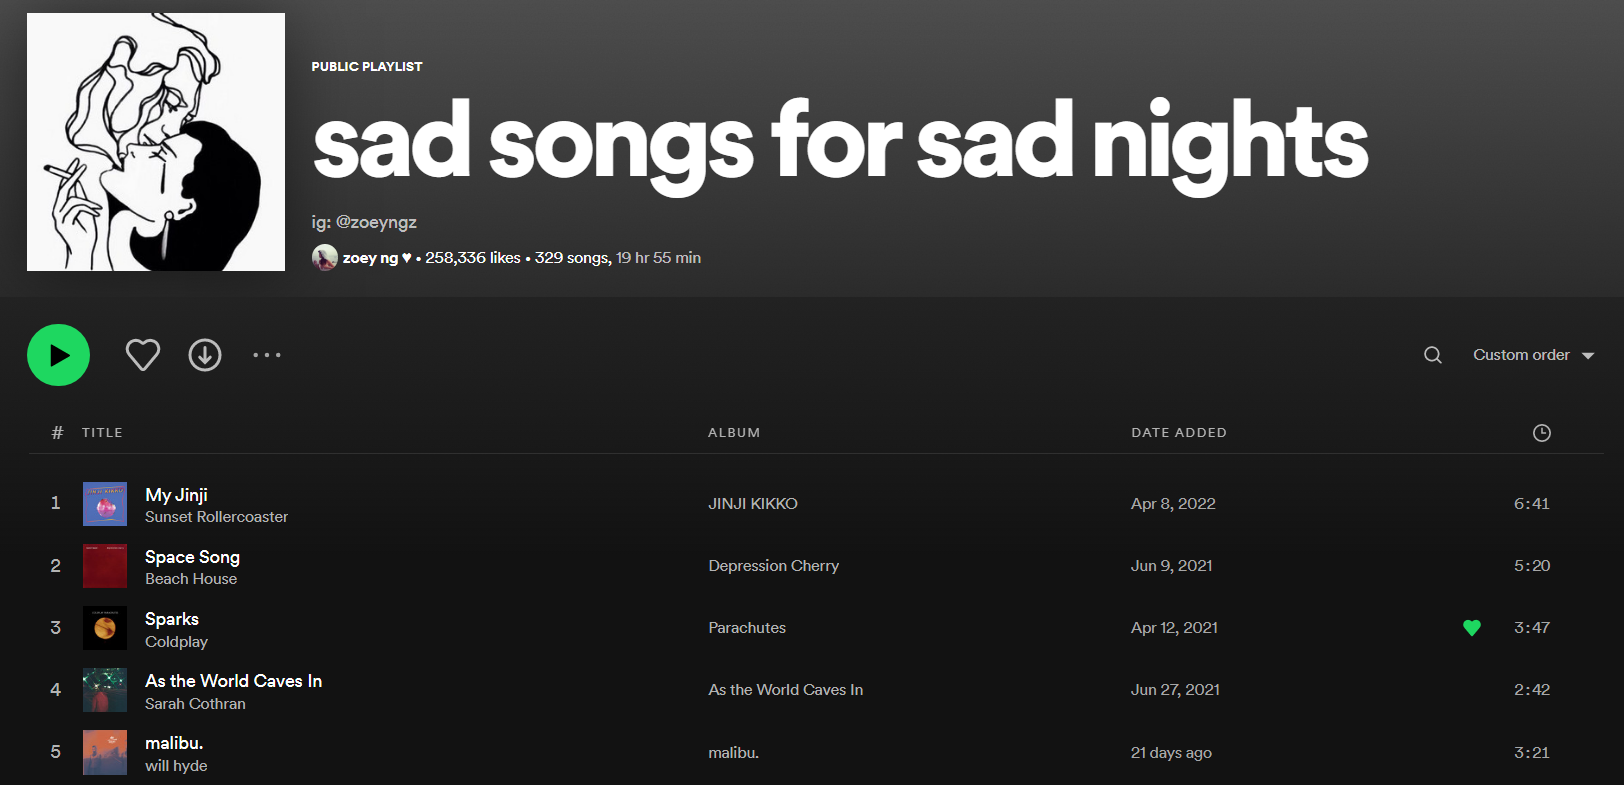 spotify user playlists can help identify which songs are similar